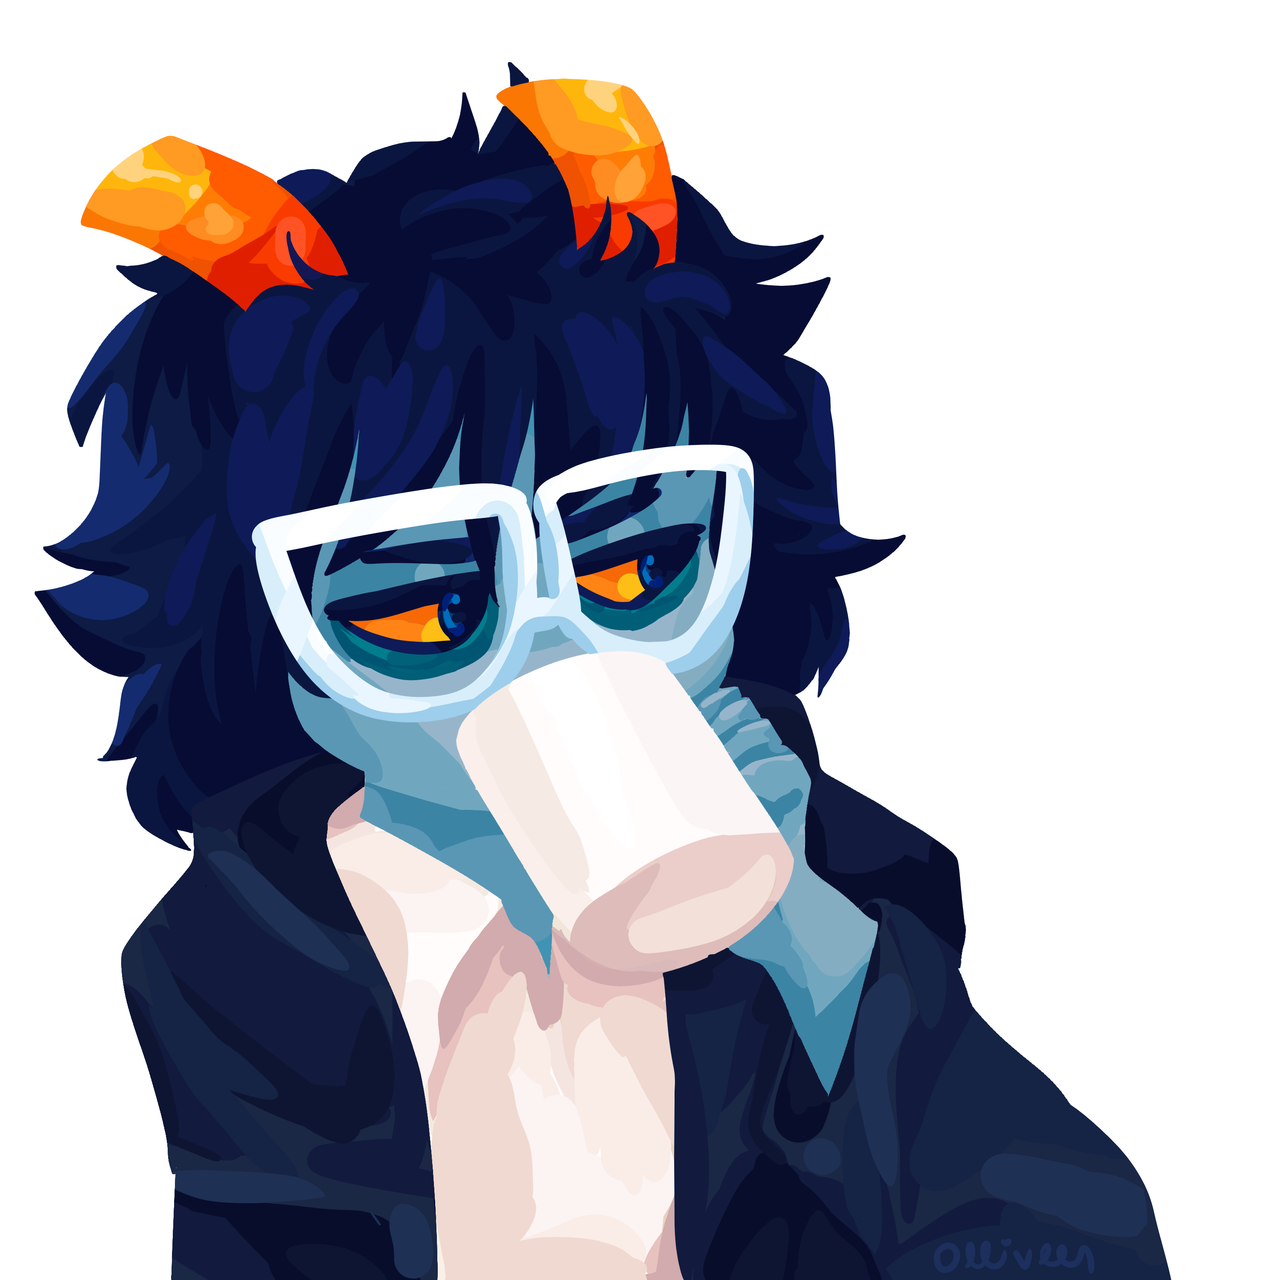 July 21, 2018. tyzias from hiveswap